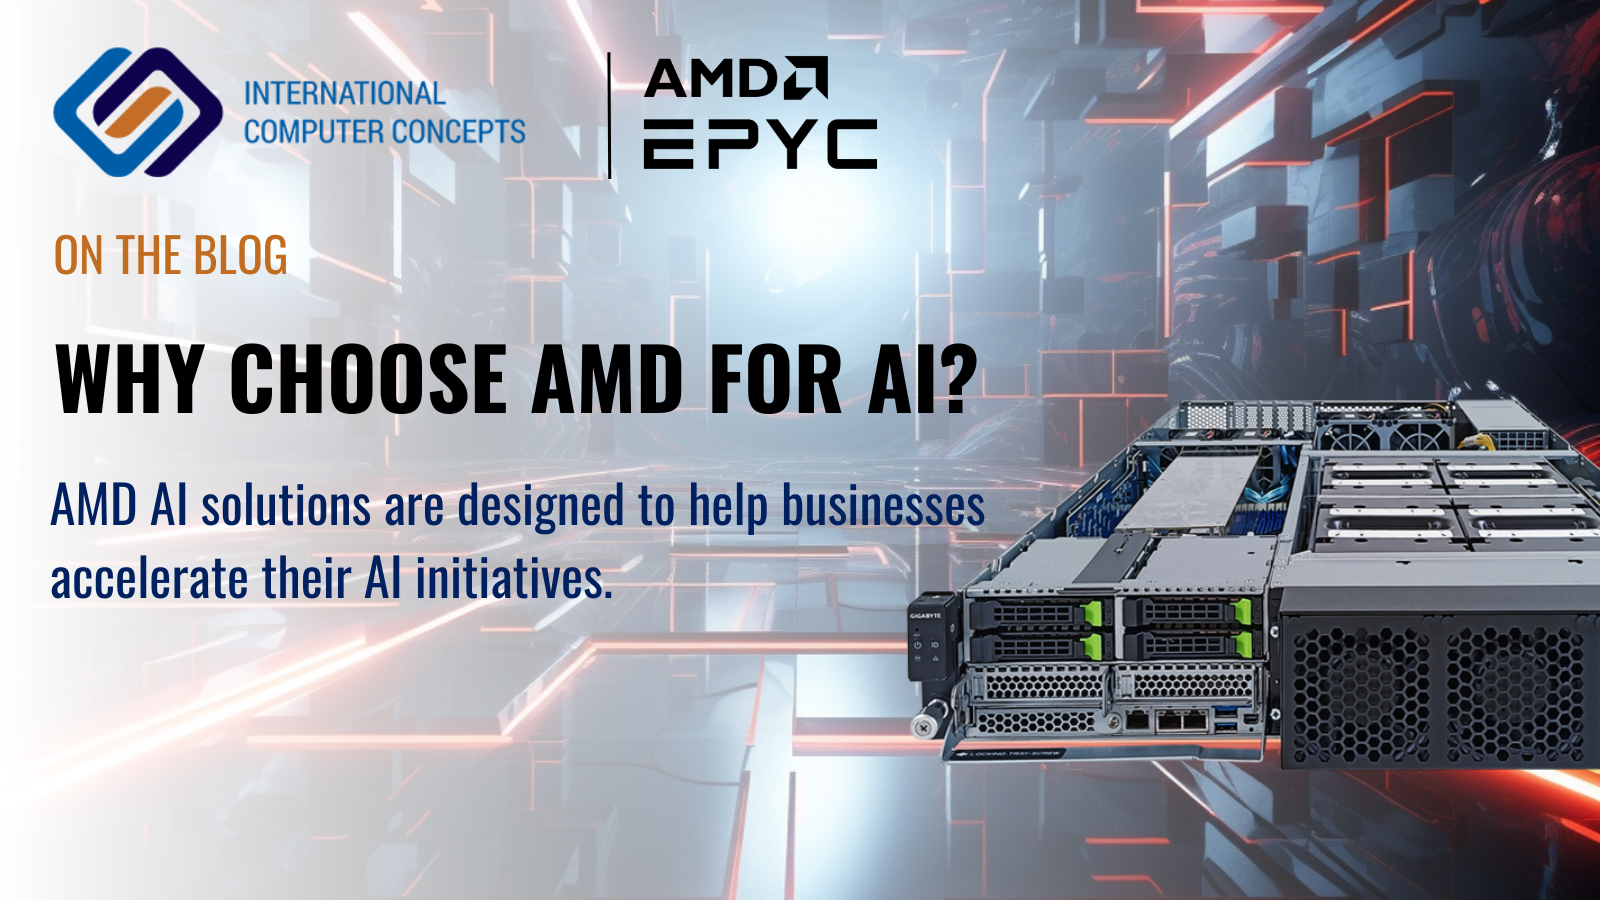 Why choose AMD for AI?